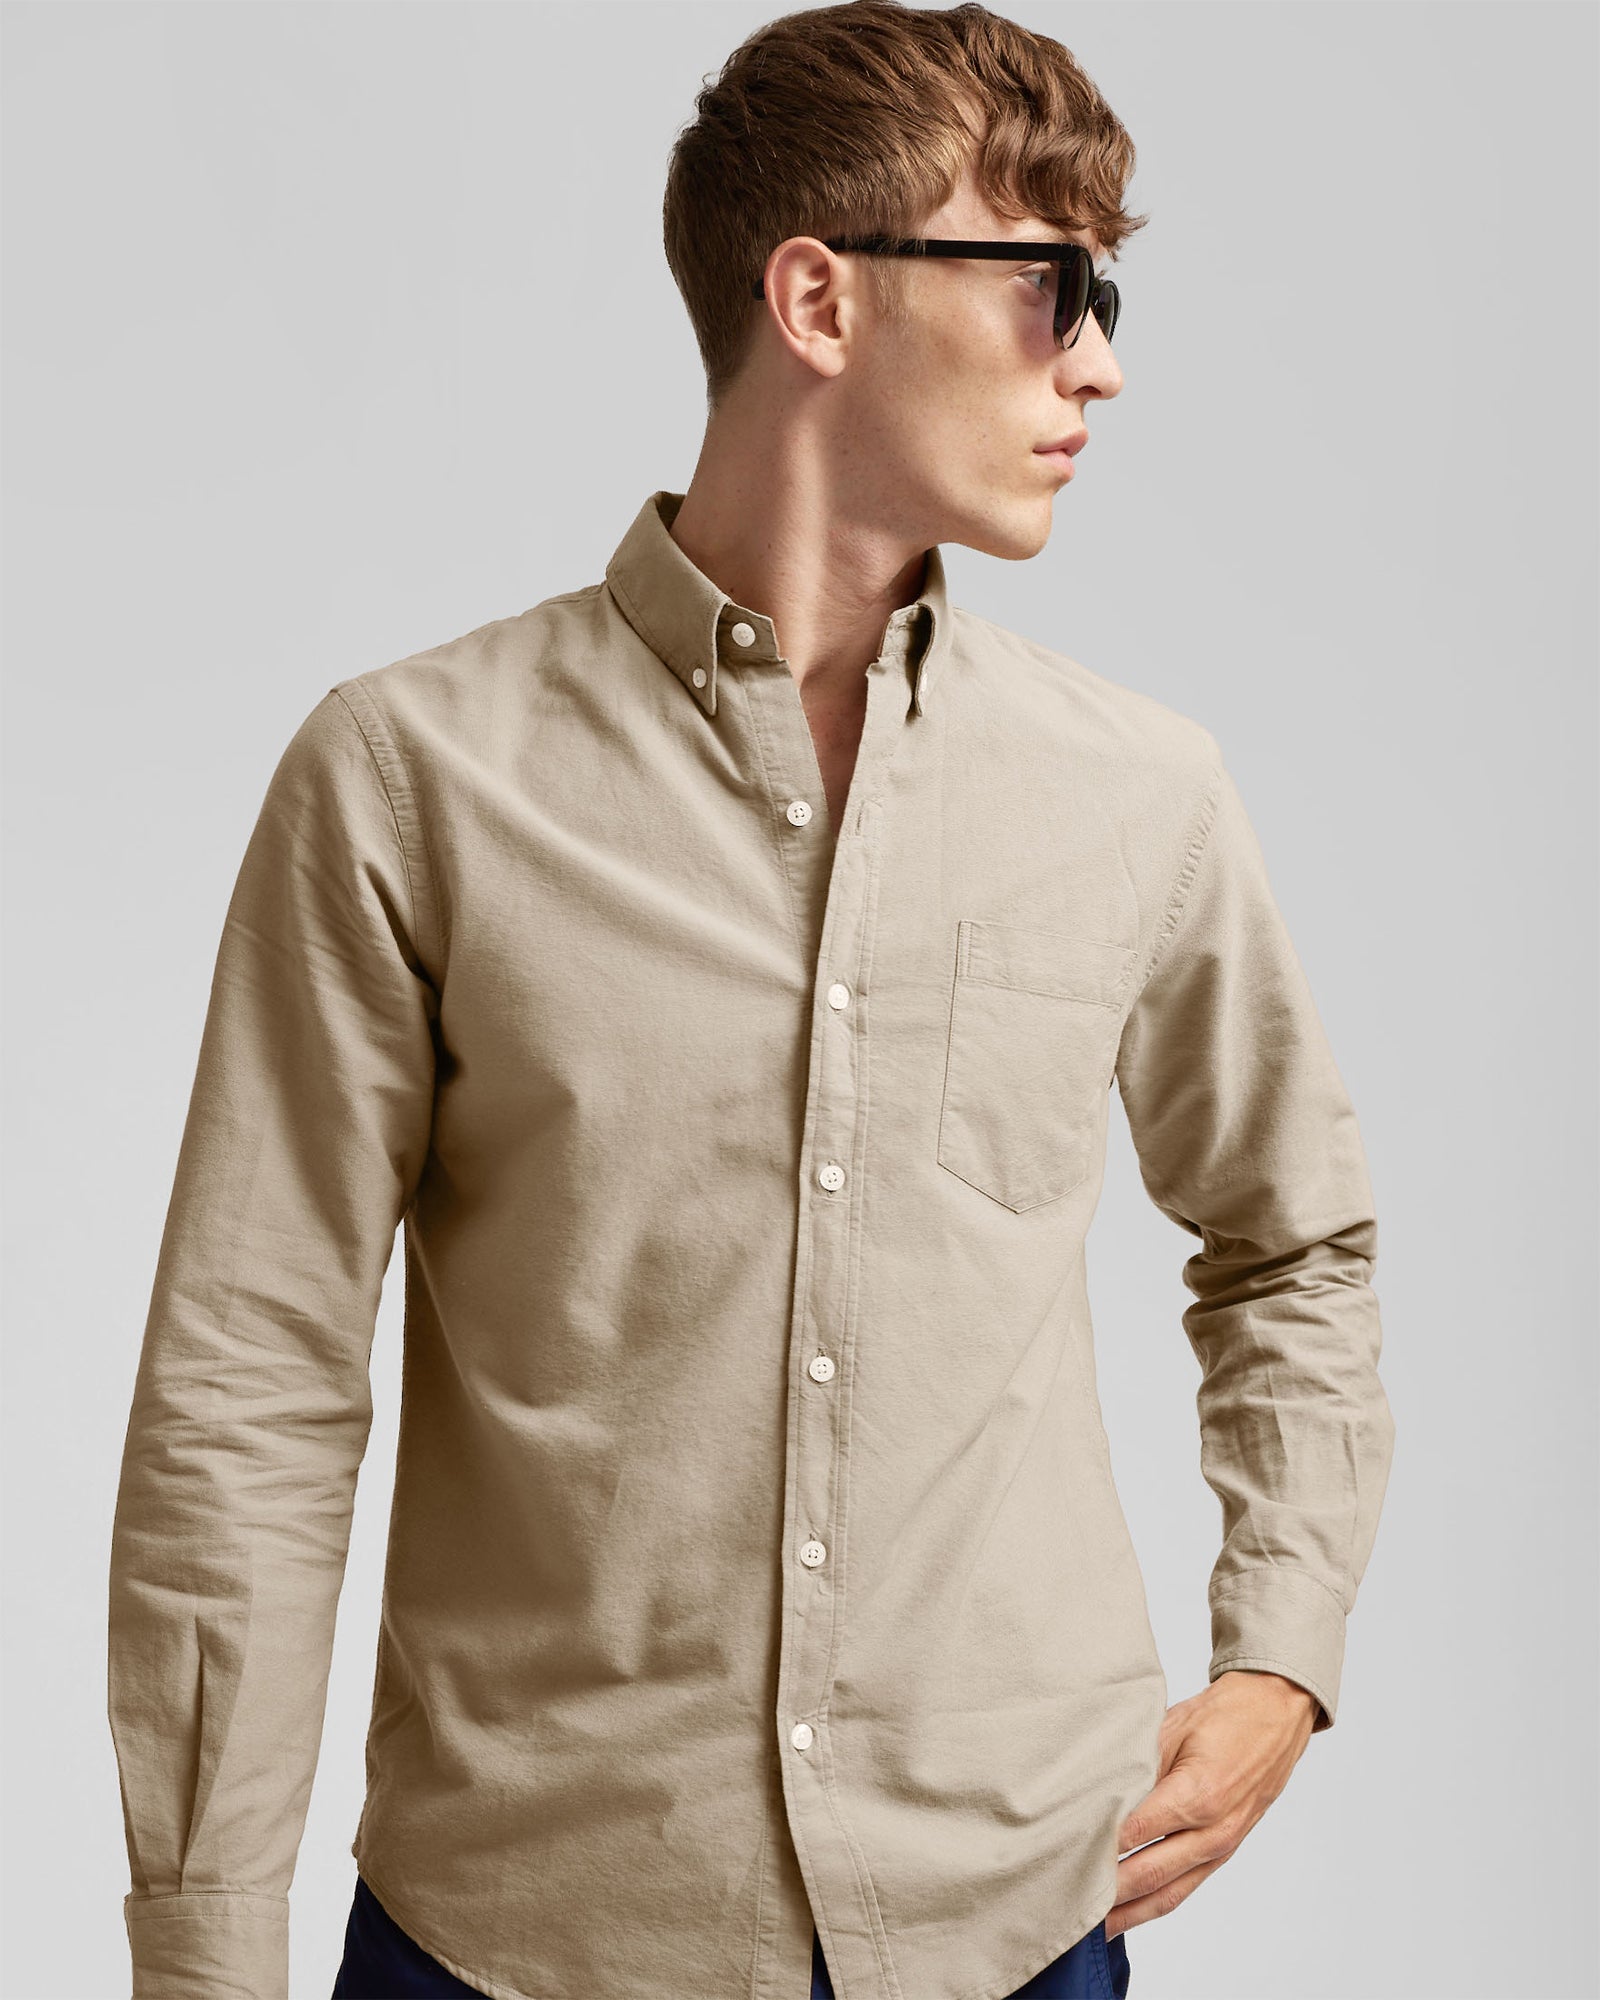 Organic Button Down Shirt - Dusty Olive